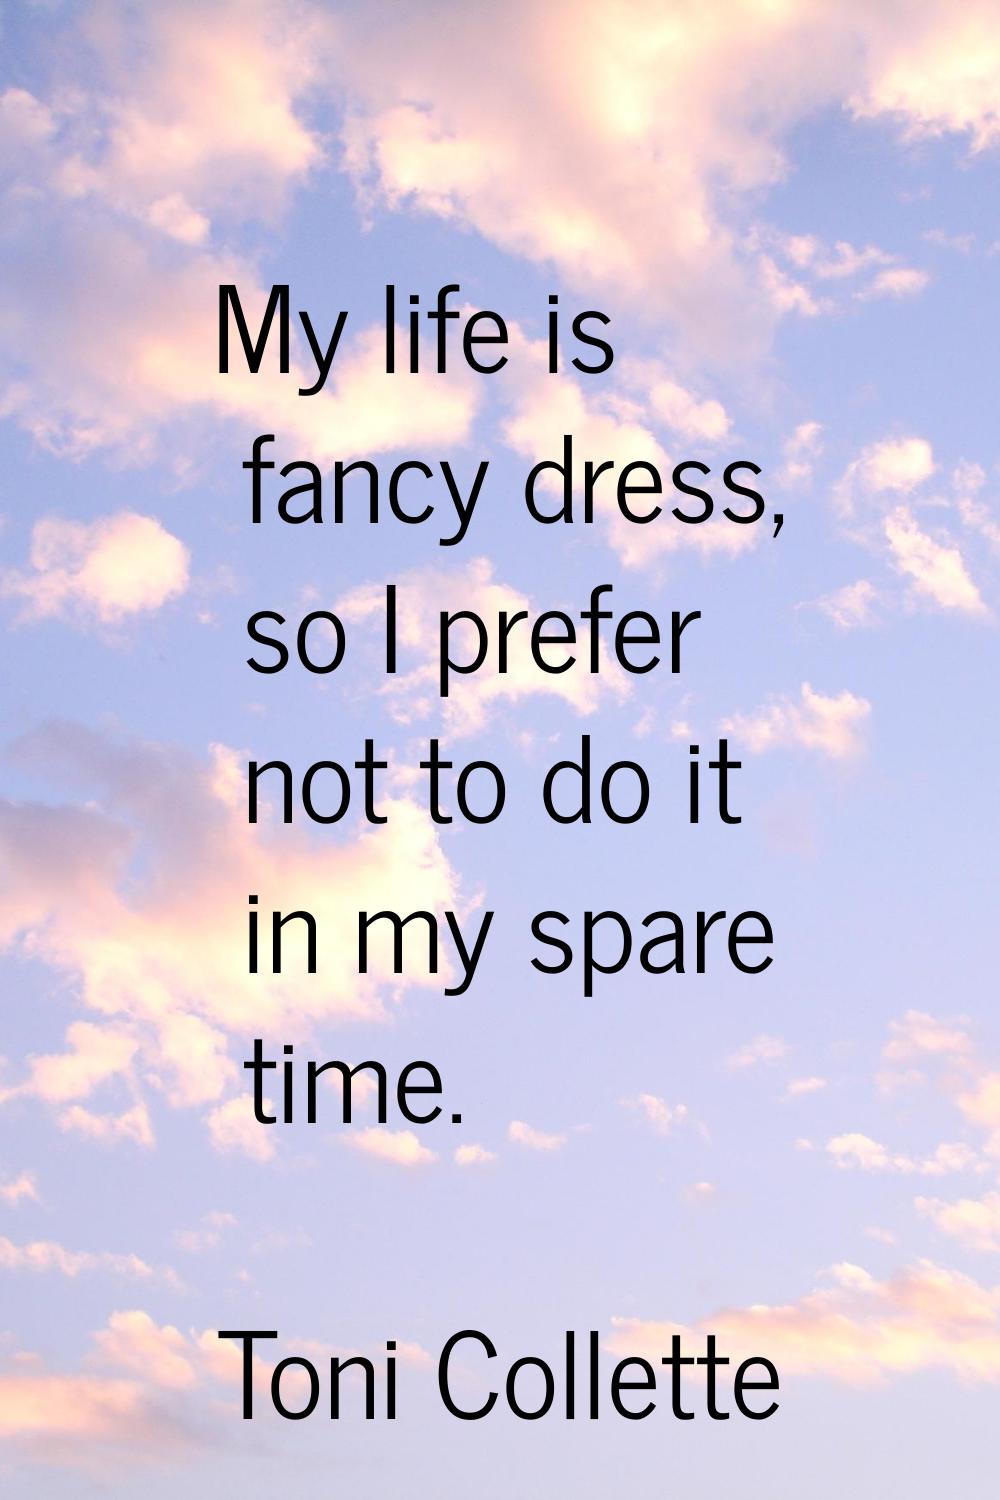 My life is fancy dress, so I prefer not to do it in my spare time.